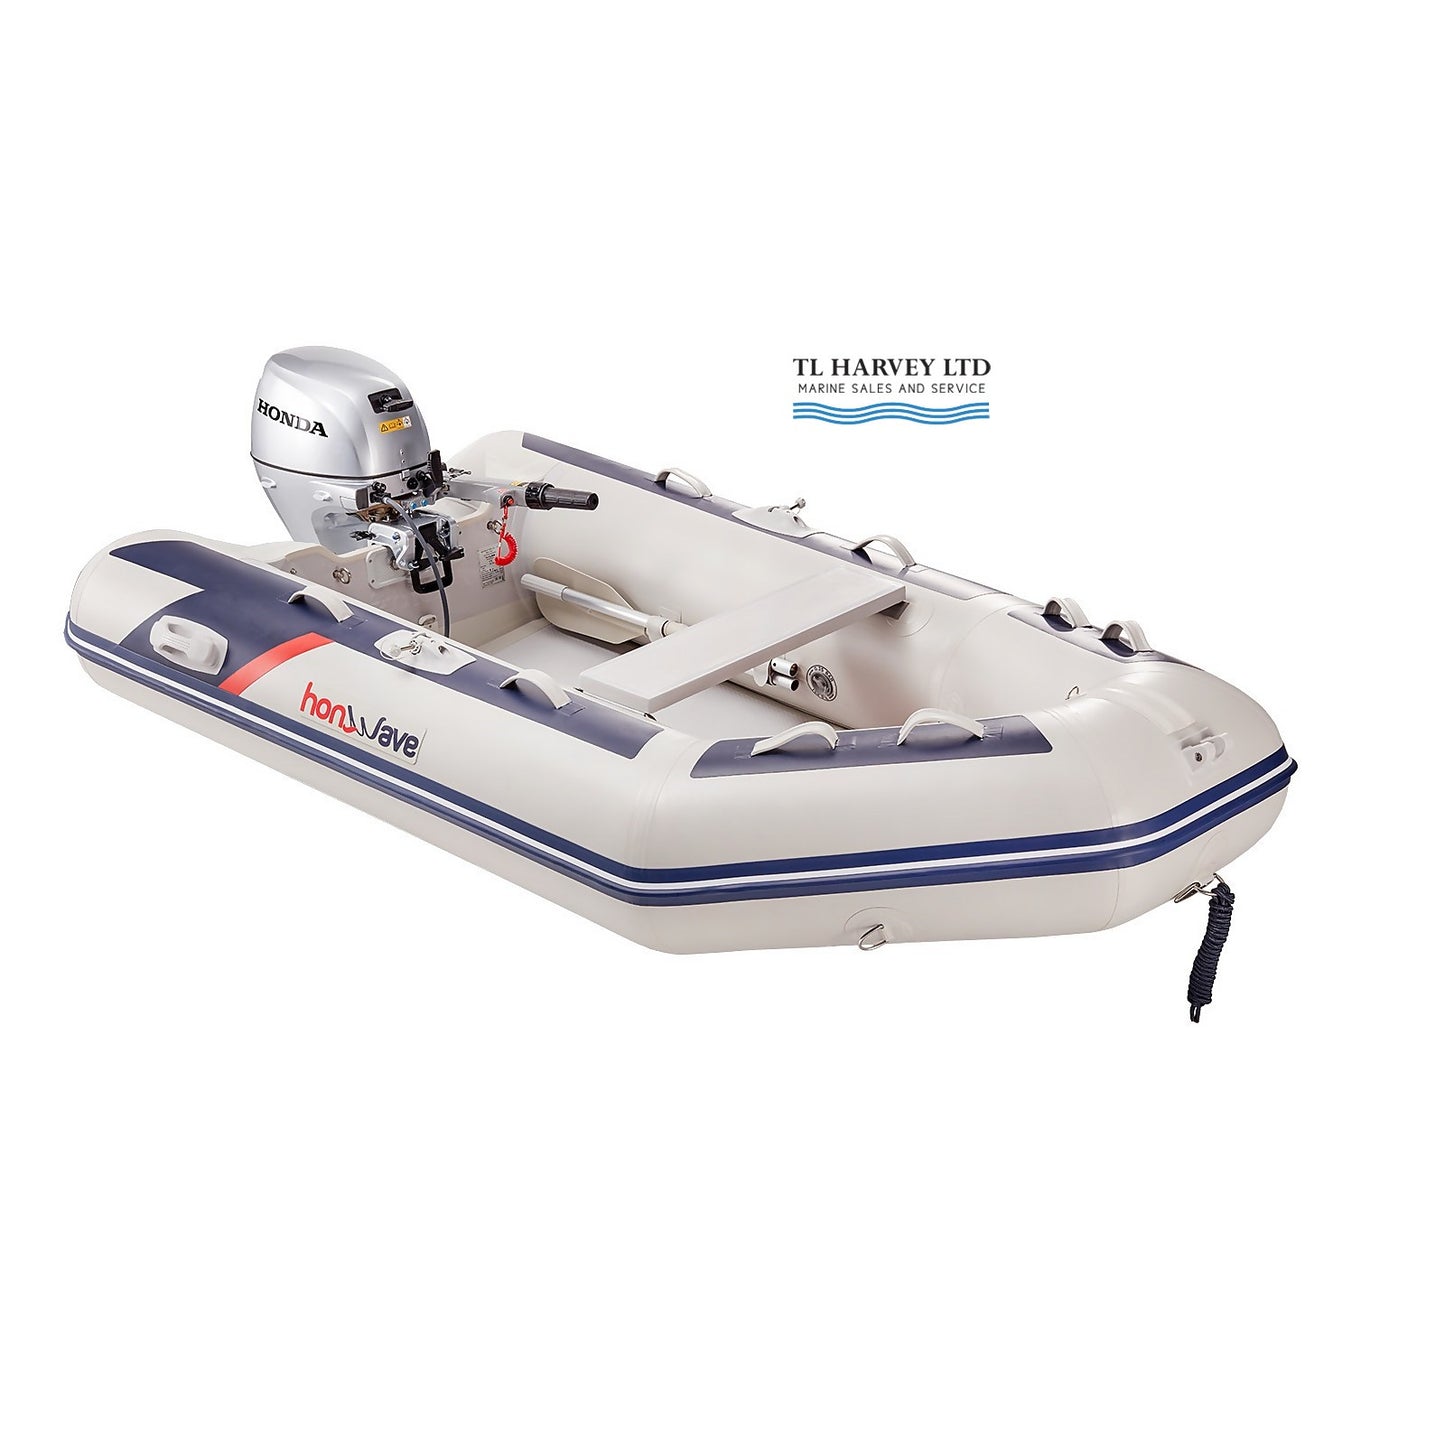 Honwave T32 3.2m Inflatable Dinghy Tender Boat with Inflatable V-Floor